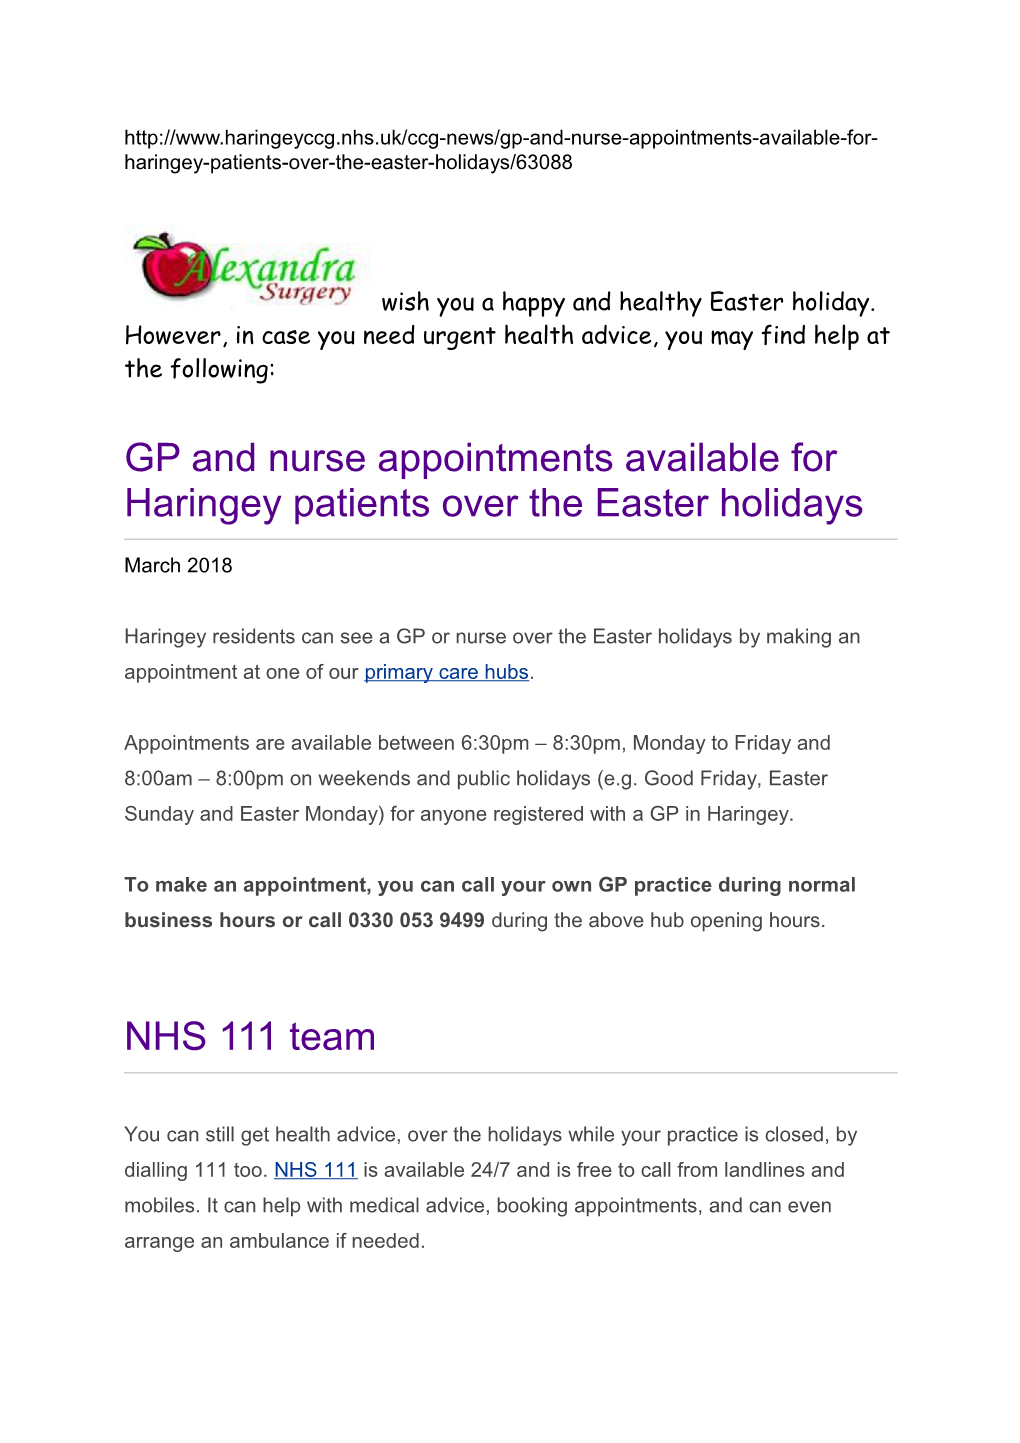 GP and Nurse Appointments Available for Haringey Patients Over the Easter Holidays